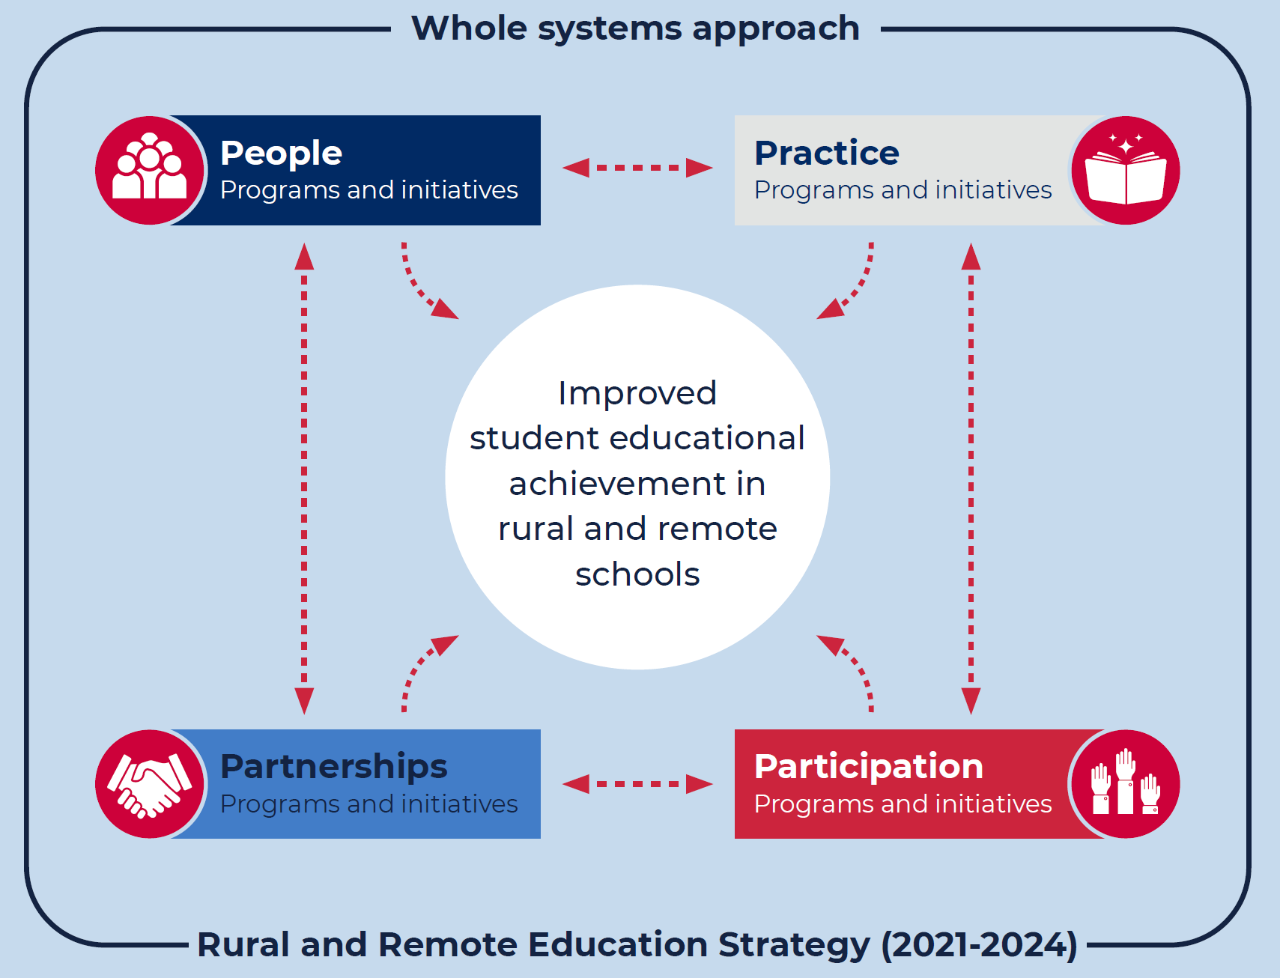 The whole systems approach model with people, practice, partnerships and participation working together for improved student educational achievement in rural and remote schools